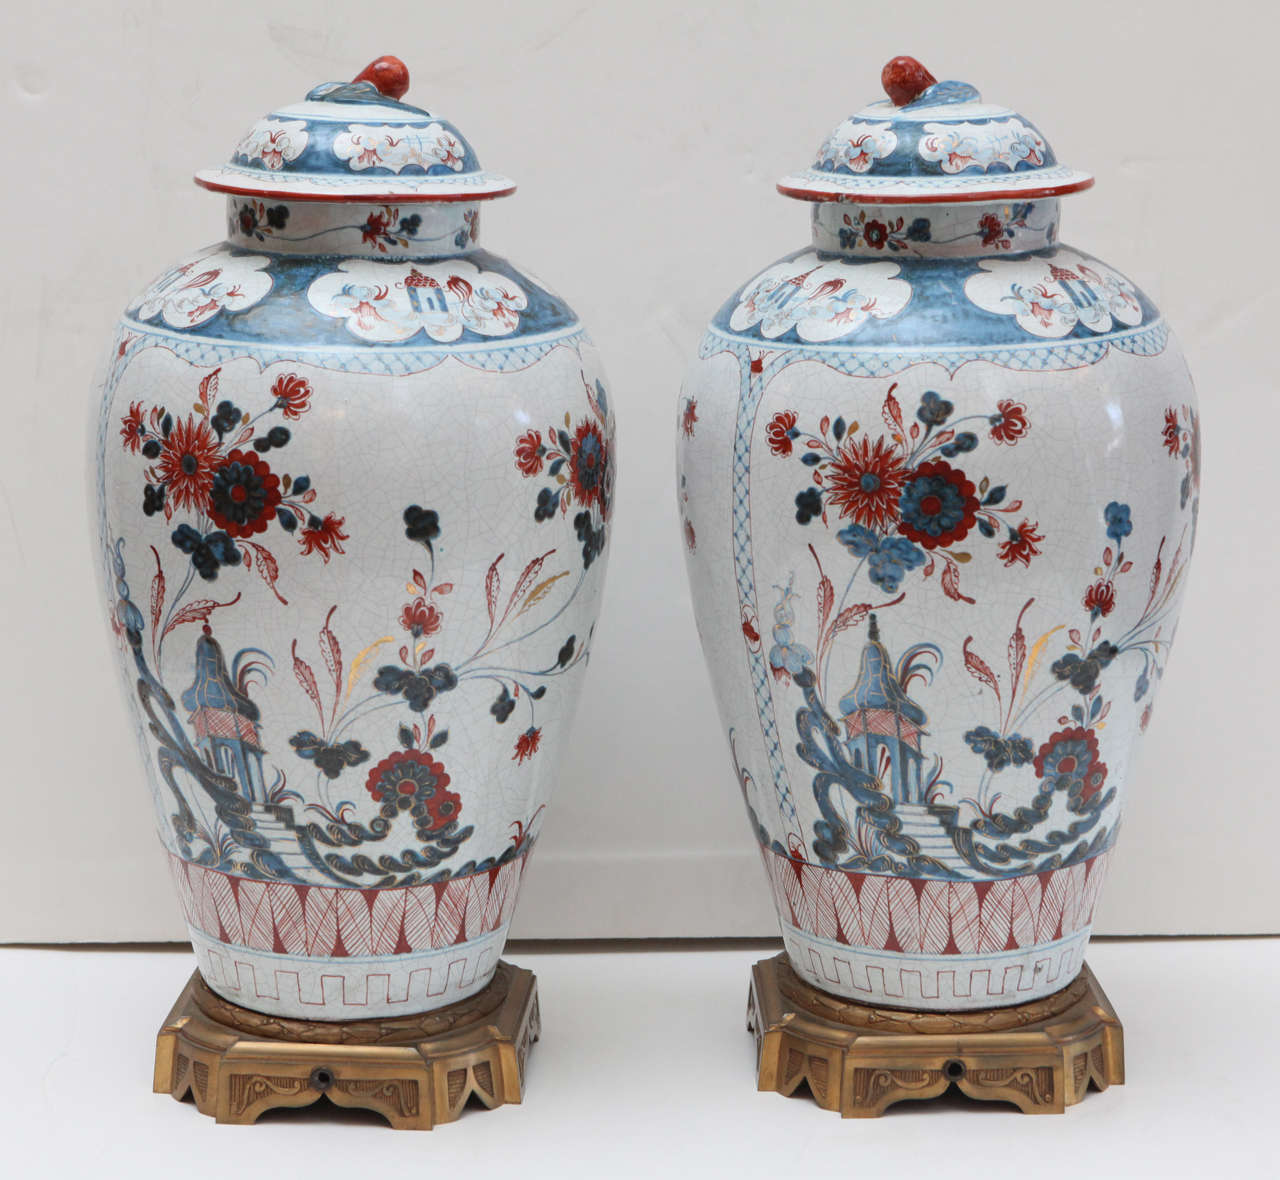 Pair of Hand-Painted, Delft Urns 2